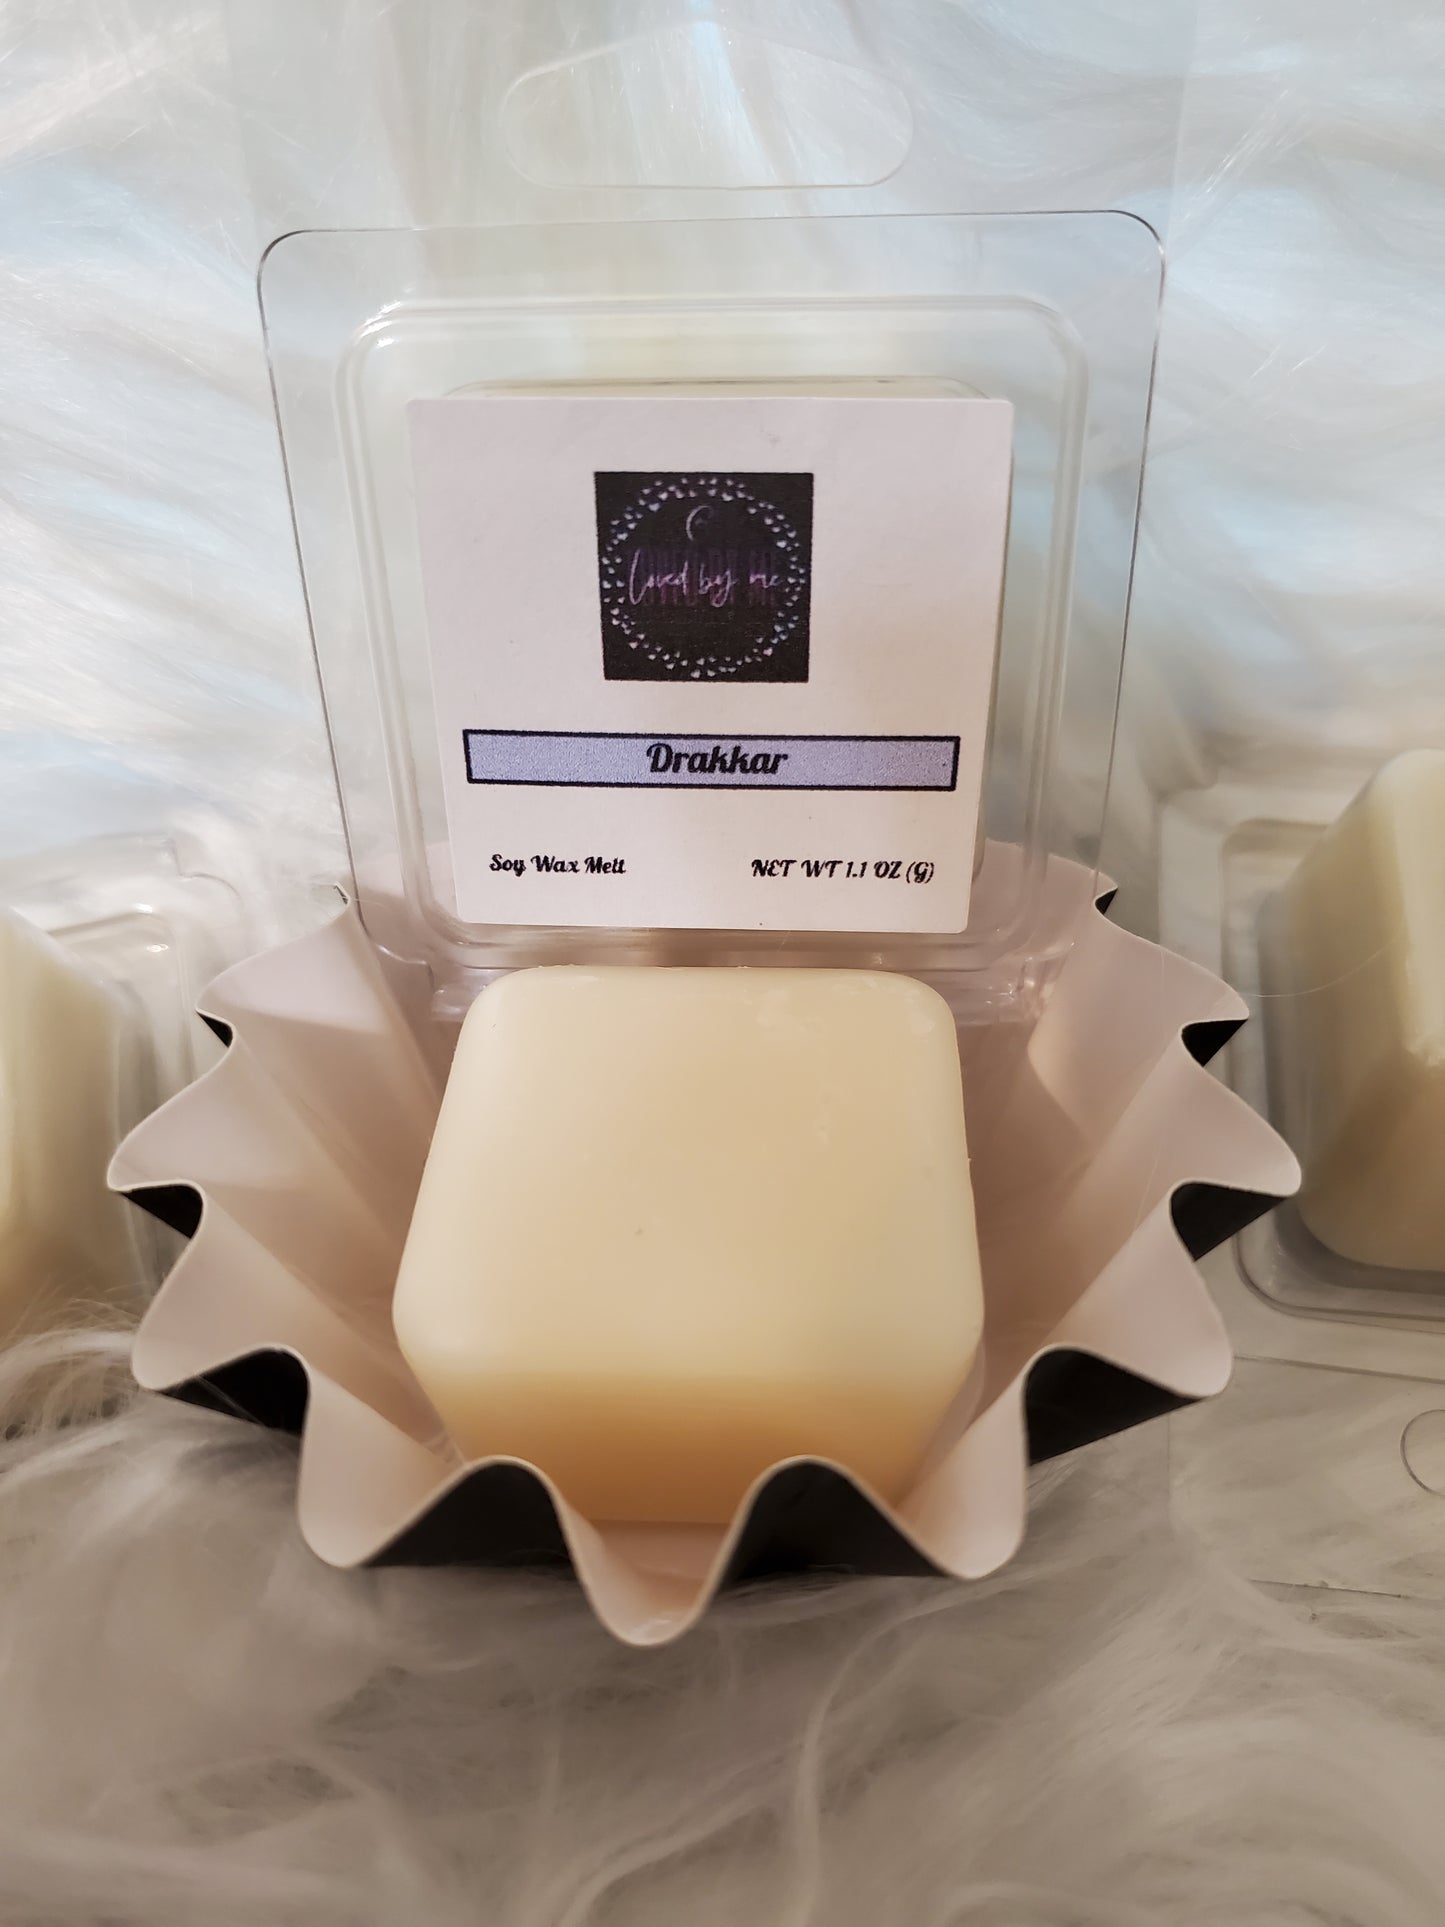 Sample-sized wax melts for you to enjoy. Every flavor will now be offered as a sample size as well as a full clamshell. You will be able to choose from any scent or a maker's mystery scent. Our wax melts are made of high-quality soy wax, beeswax, and fragrance oils. Order ship within 2 business so you can start enjoying them sooner.